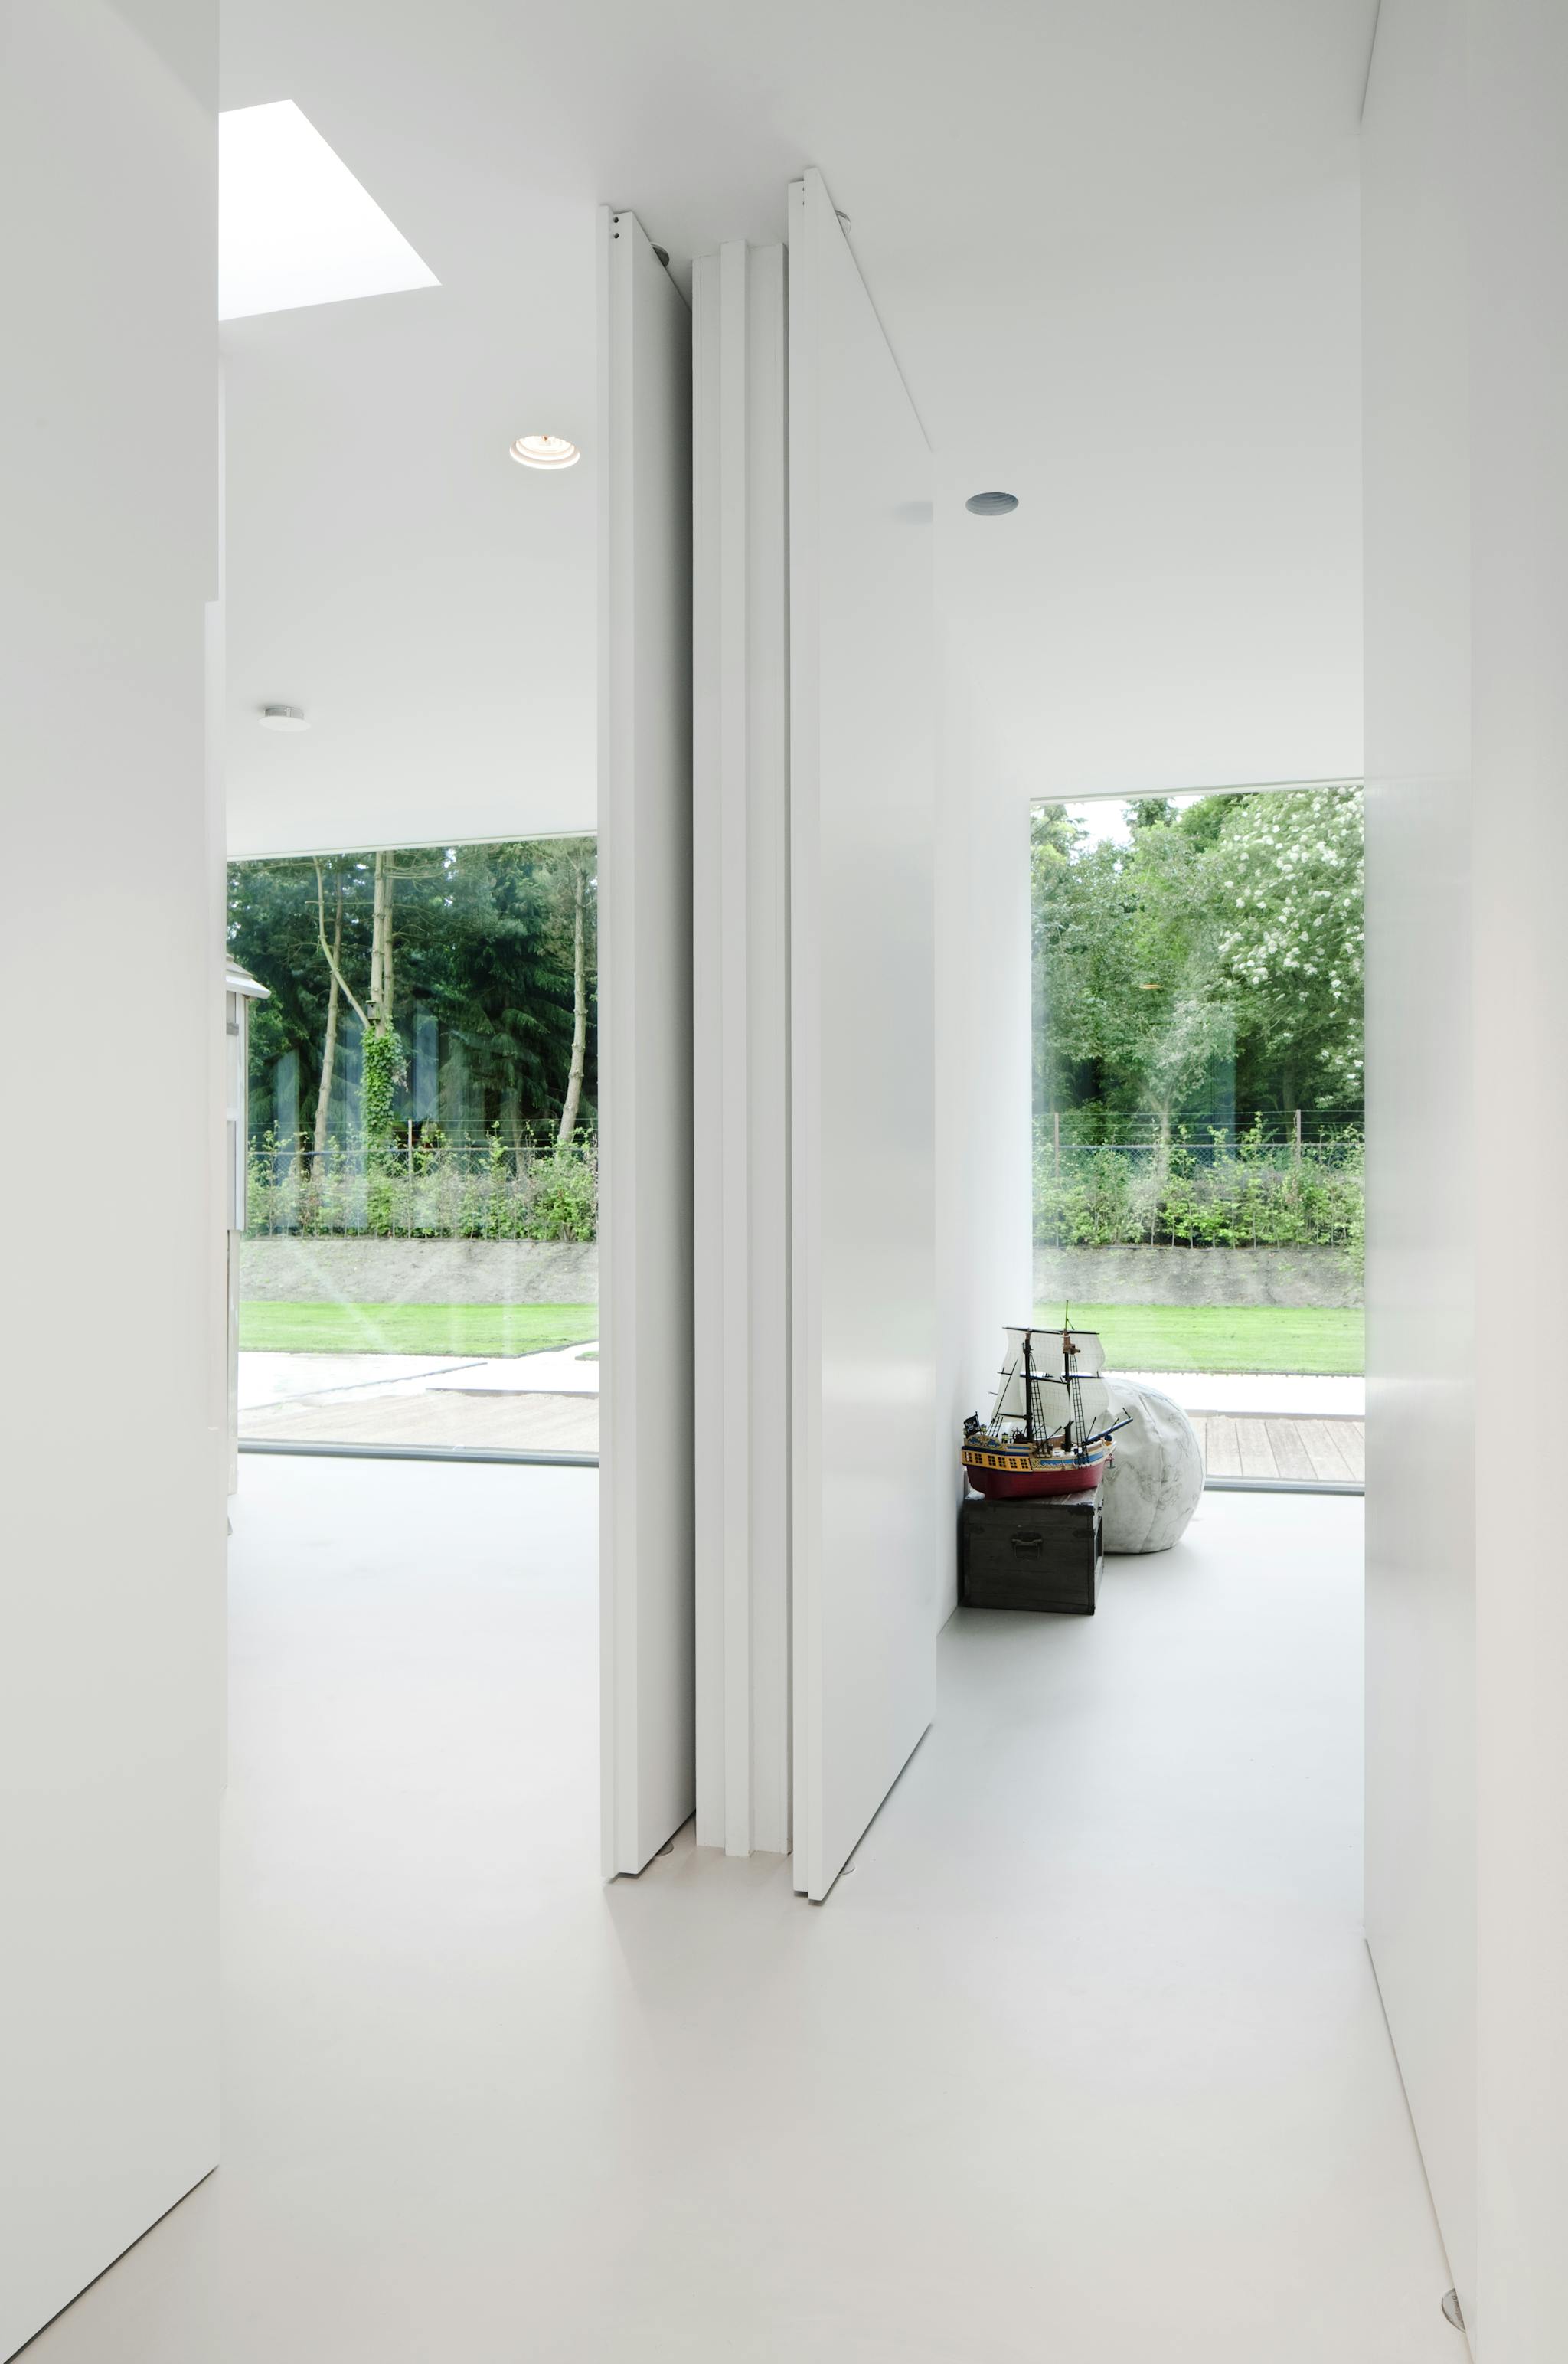 A white minimal interior looking at a dividing wall, looking out into garden through large minimal glazing, with two open pivoting doors